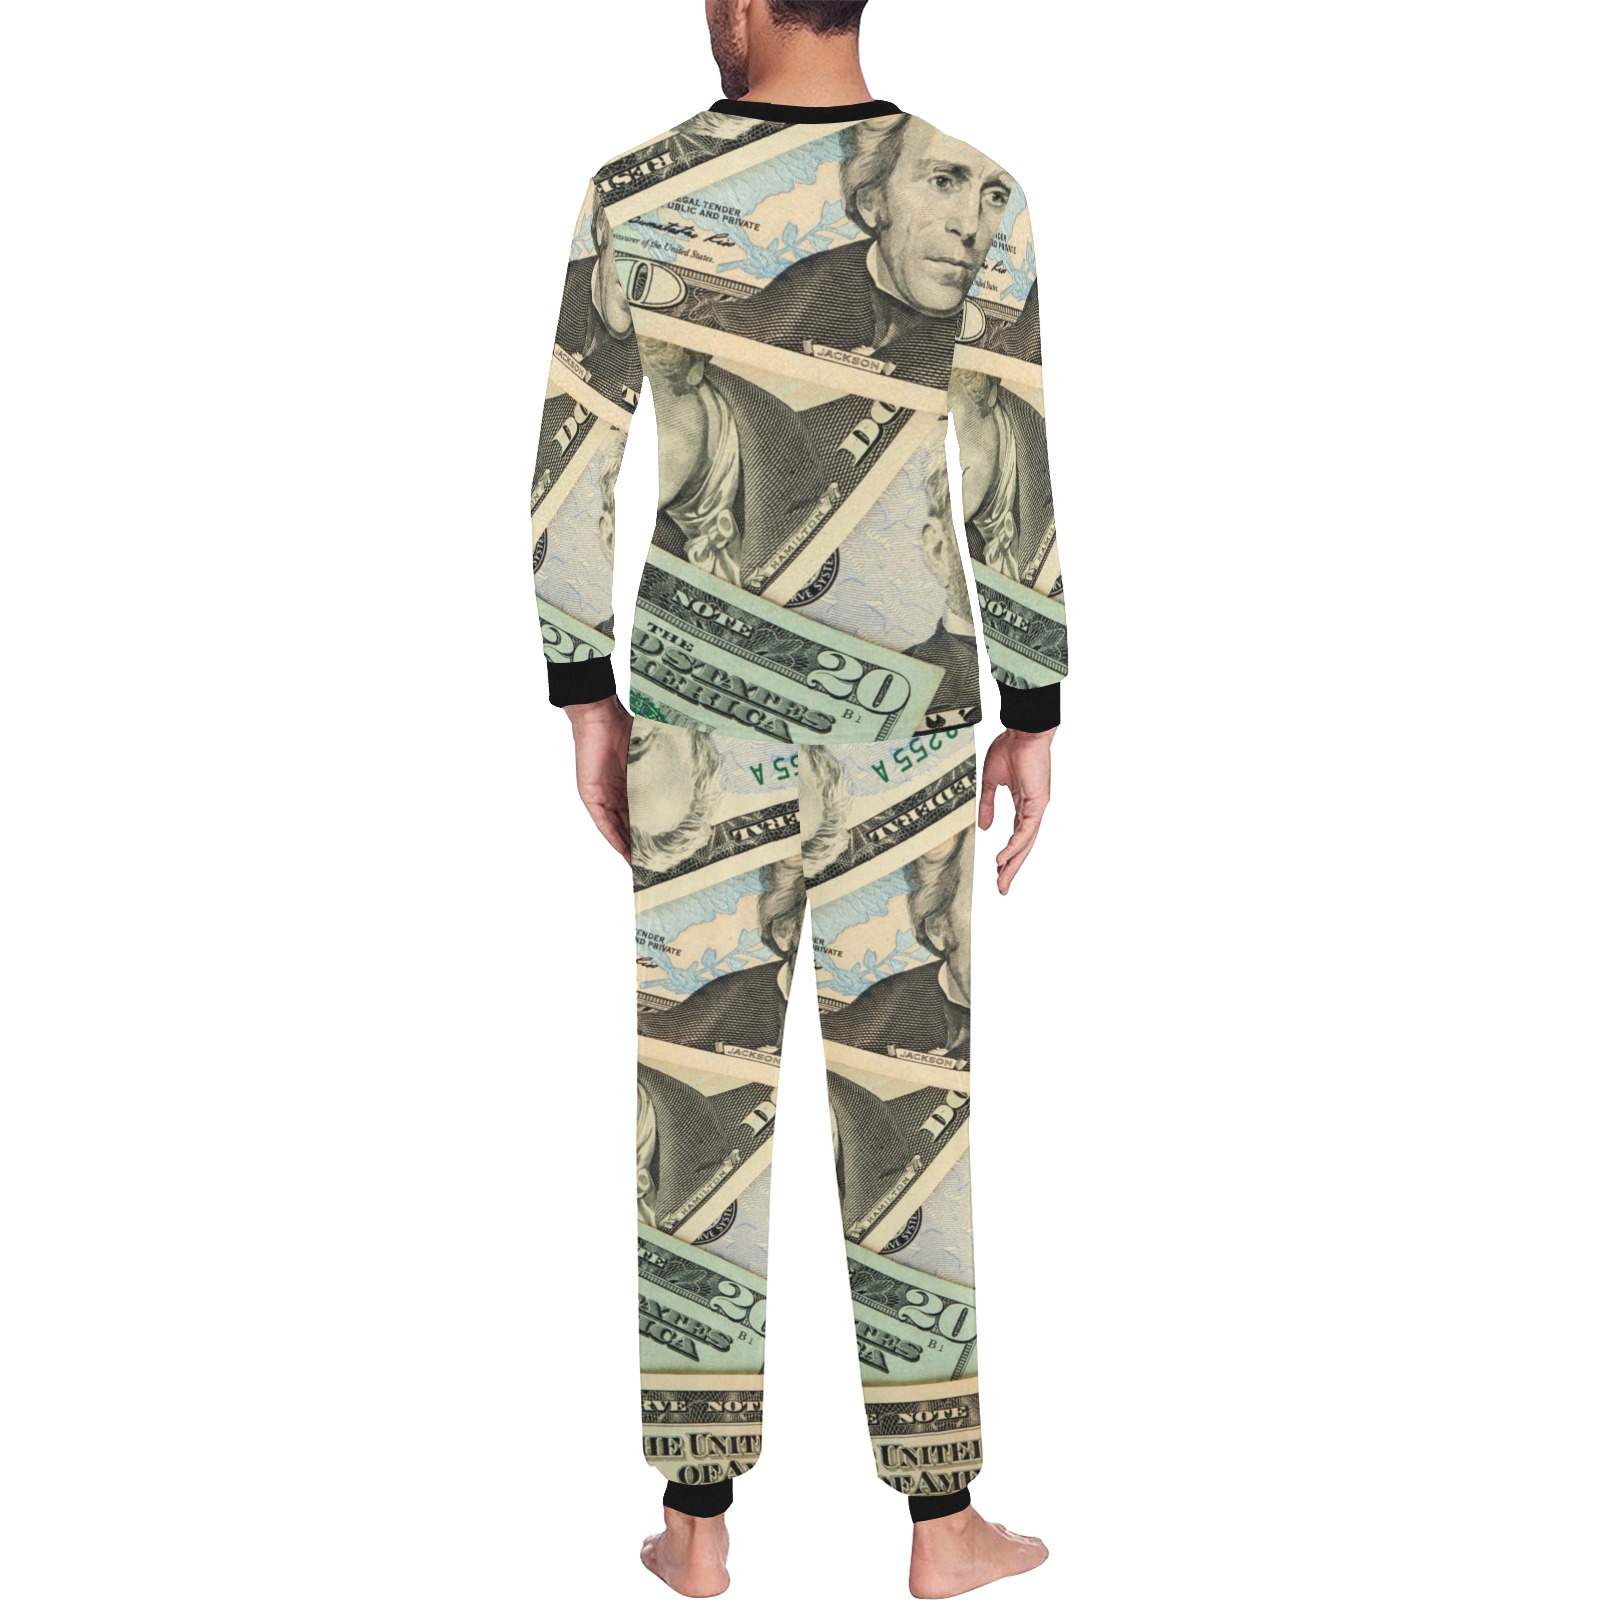 US PAPER CURRENCY Men's All Over Print Pajama Set